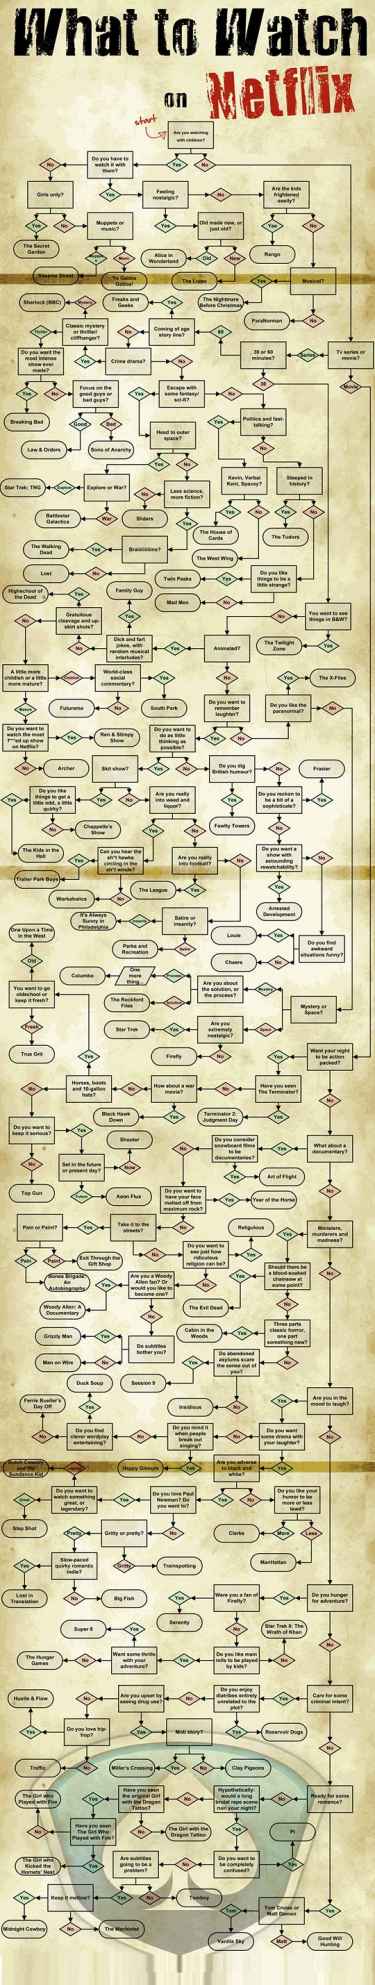 What to watch on Netflix flow chart